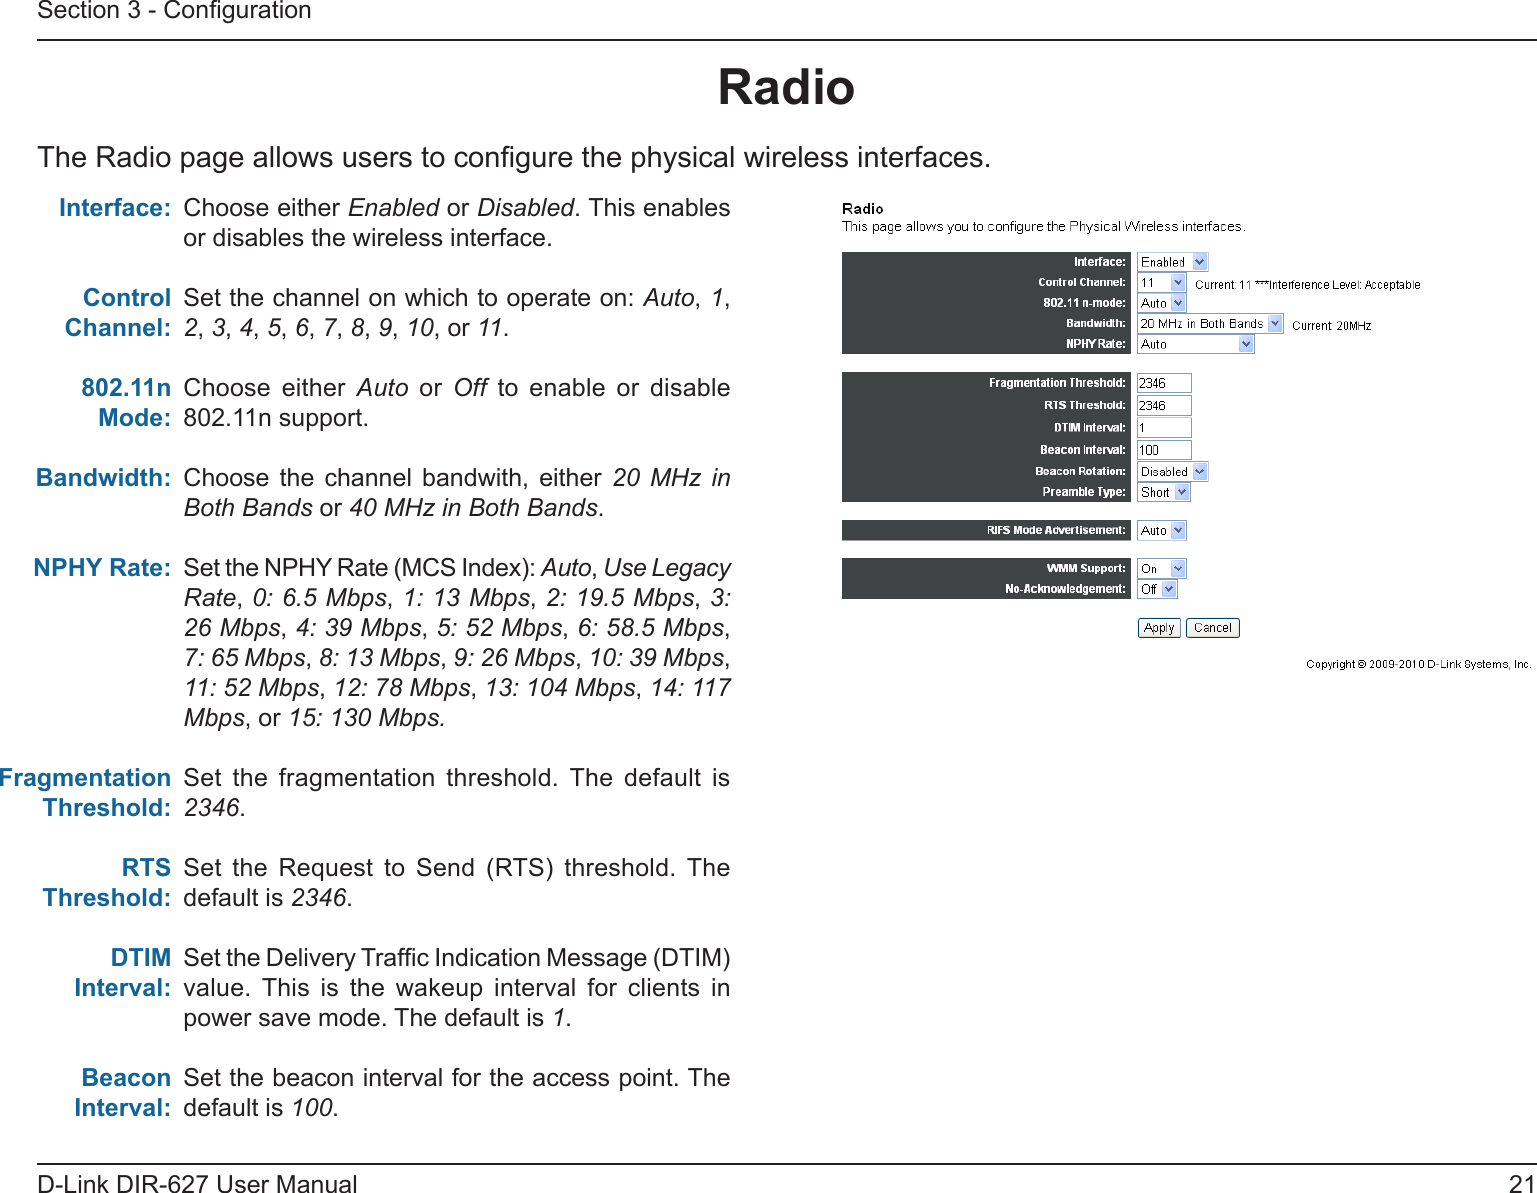 21D-Link DIR-627 User ManualSection 3 - CongurationRadioThe Radio page allows users to congure the physical wireless interfaces.Choose either Enabled or Disabled. This enables or disables the wireless interface.Set the channel on which to operate on: Auto, 1, 2, 3, 4, 5, 6, 7, 8, 9, 10, or 11.Choose  either  Auto  or  Off to enable or disable 802.11n support. Choose  the  channel  bandwith,  either  20 MHz in Both Bands or 40 MHz in Both Bands.Set the NPHY Rate (MCS Index): Auto, Use Legacy Rate, 0: 6.5 Mbps, 1: 13 Mbps, 2: 19.5 Mbps, 3: 26 Mbps, 4: 39 Mbps, 5: 52 Mbps, 6: 58.5 Mbps, 7: 65 Mbps, 8: 13 Mbps, 9: 26 Mbps, 10: 39 Mbps, 11: 52 Mbps, 12: 78 Mbps, 13: 104 Mbps, 14: 117 Mbps, or 15: 130 Mbps.Set  the  fragmentation  threshold.  The  default  is 2346.Set  the  Request  to  Send  (RTS)  threshold.  The  default is 2346.Set the Delivery Trafc Indication Message (DTIM) value.  This  is  the  wakeup  interval  for  clients  in power save mode. The default is 1.Set the beacon interval for the access point. The default is 100.Interface:Control Channel:802.11nMode:Bandwidth:NPHYRate:FragmentationThreshold:RTSThreshold:DTIMInterval:BeaconInterval: